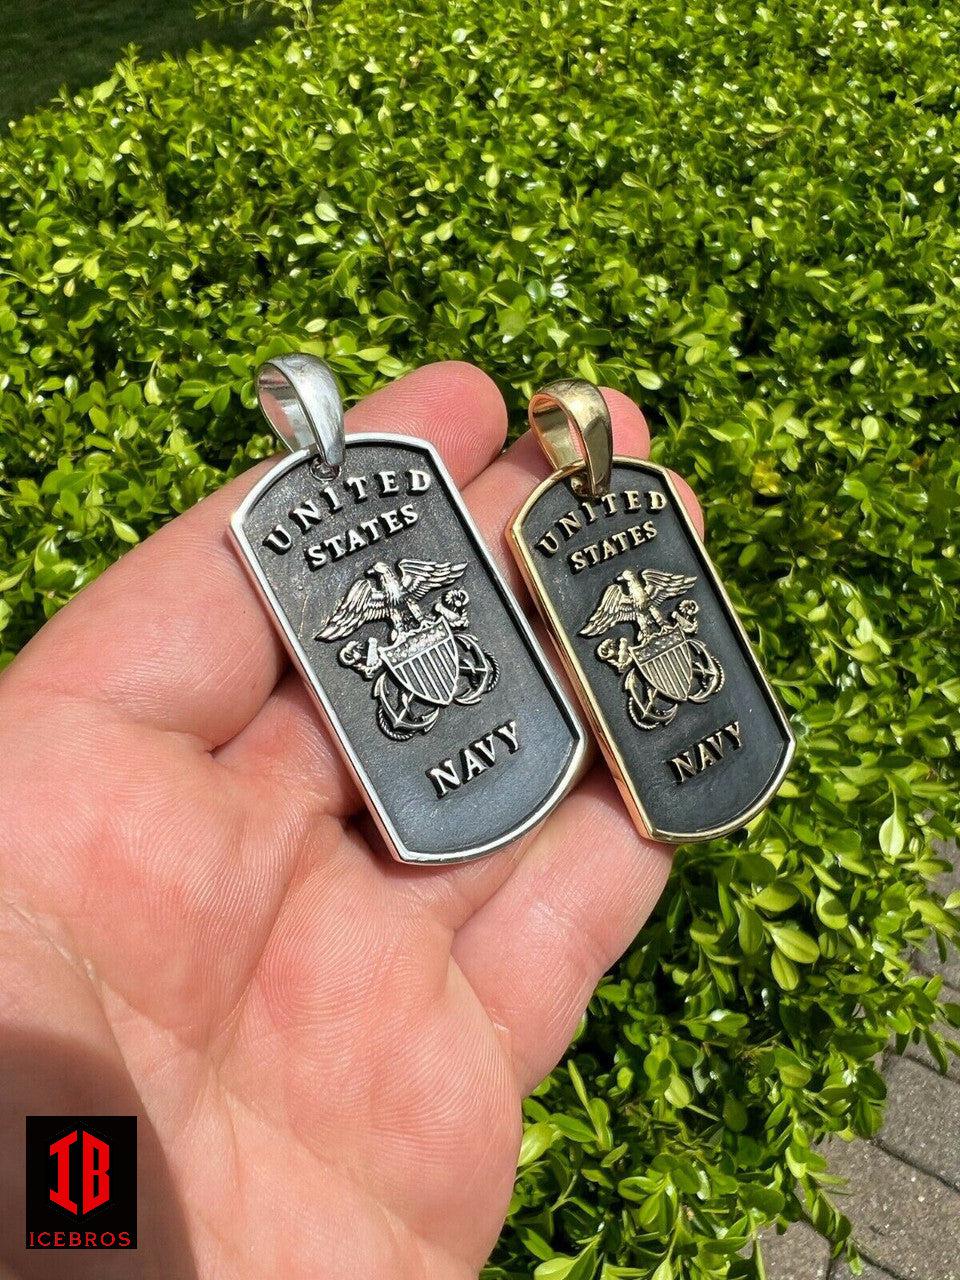 925 Silver Over Gold US Navy Sailor Captain Military Naval Dog Tag Pendant Necklace